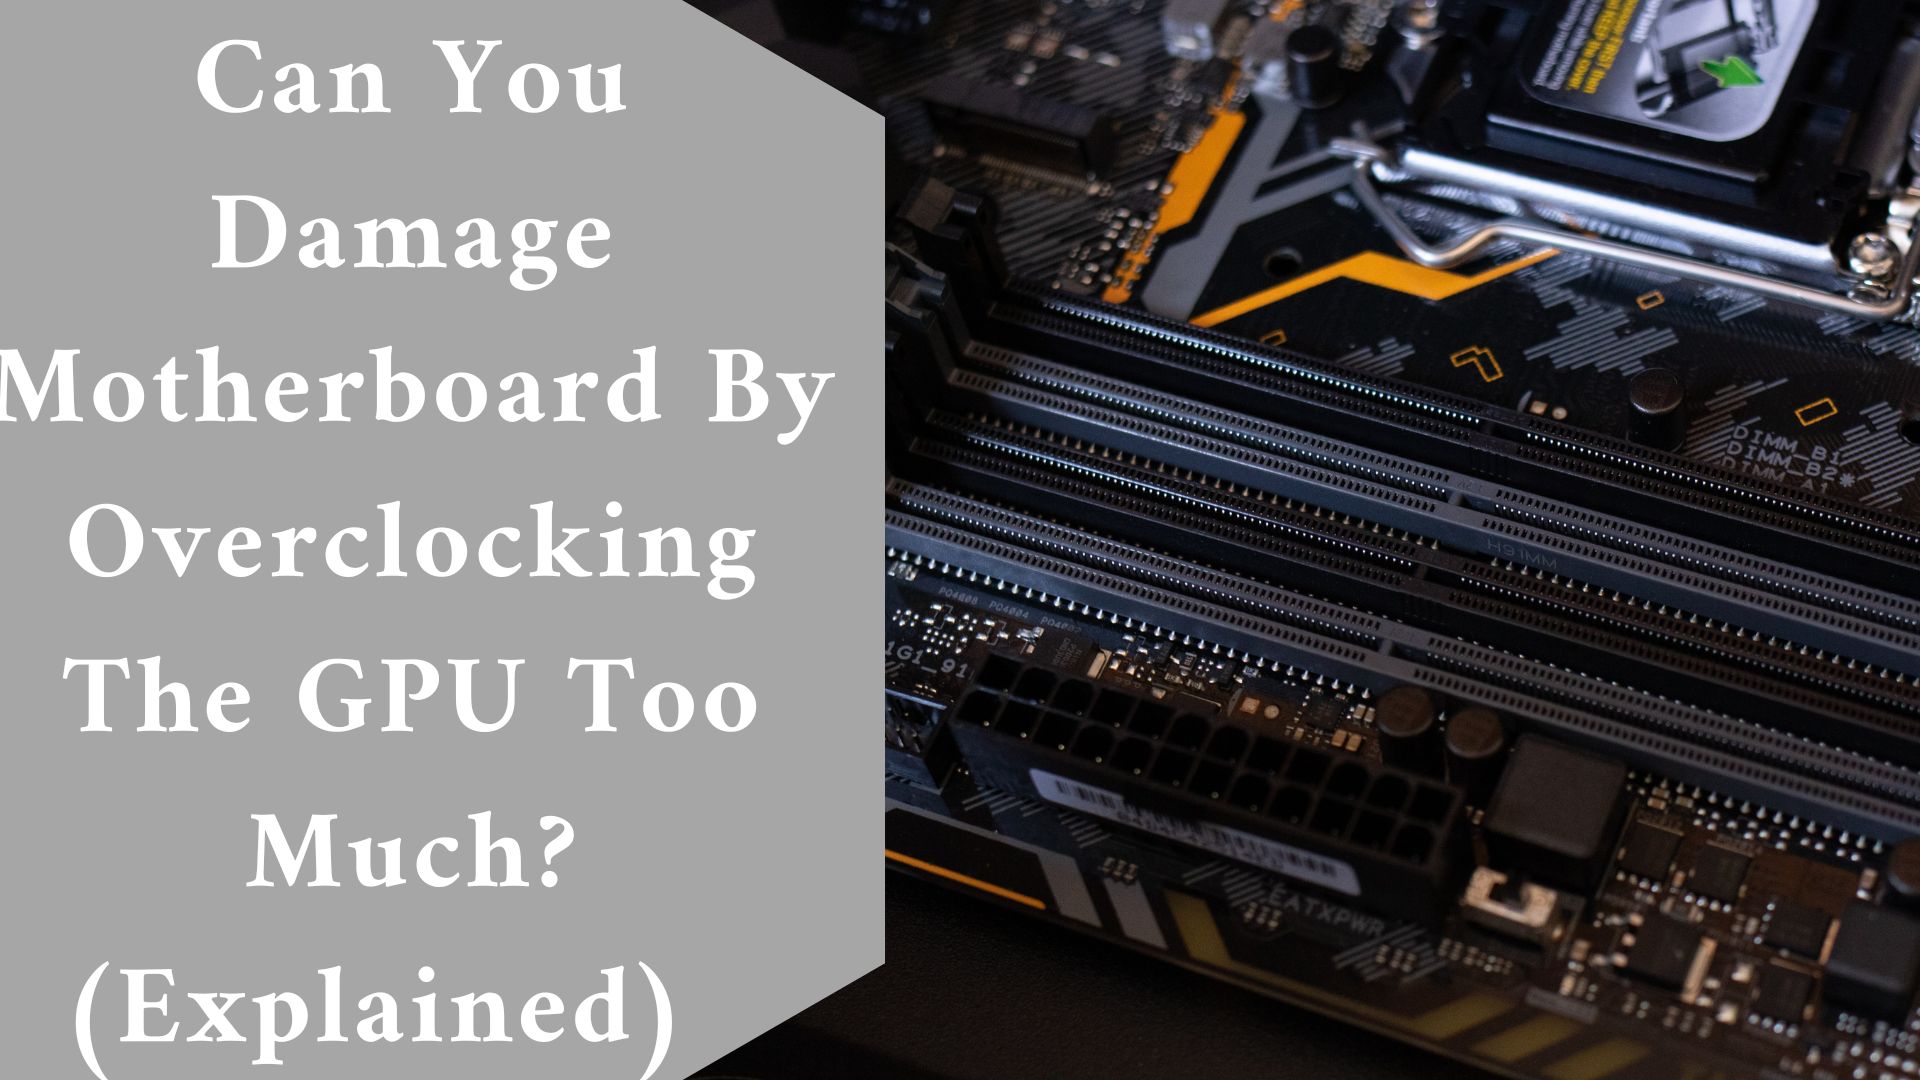 Can You Damage Motherboard By Overclocking The GPU Too Much? (Explained)